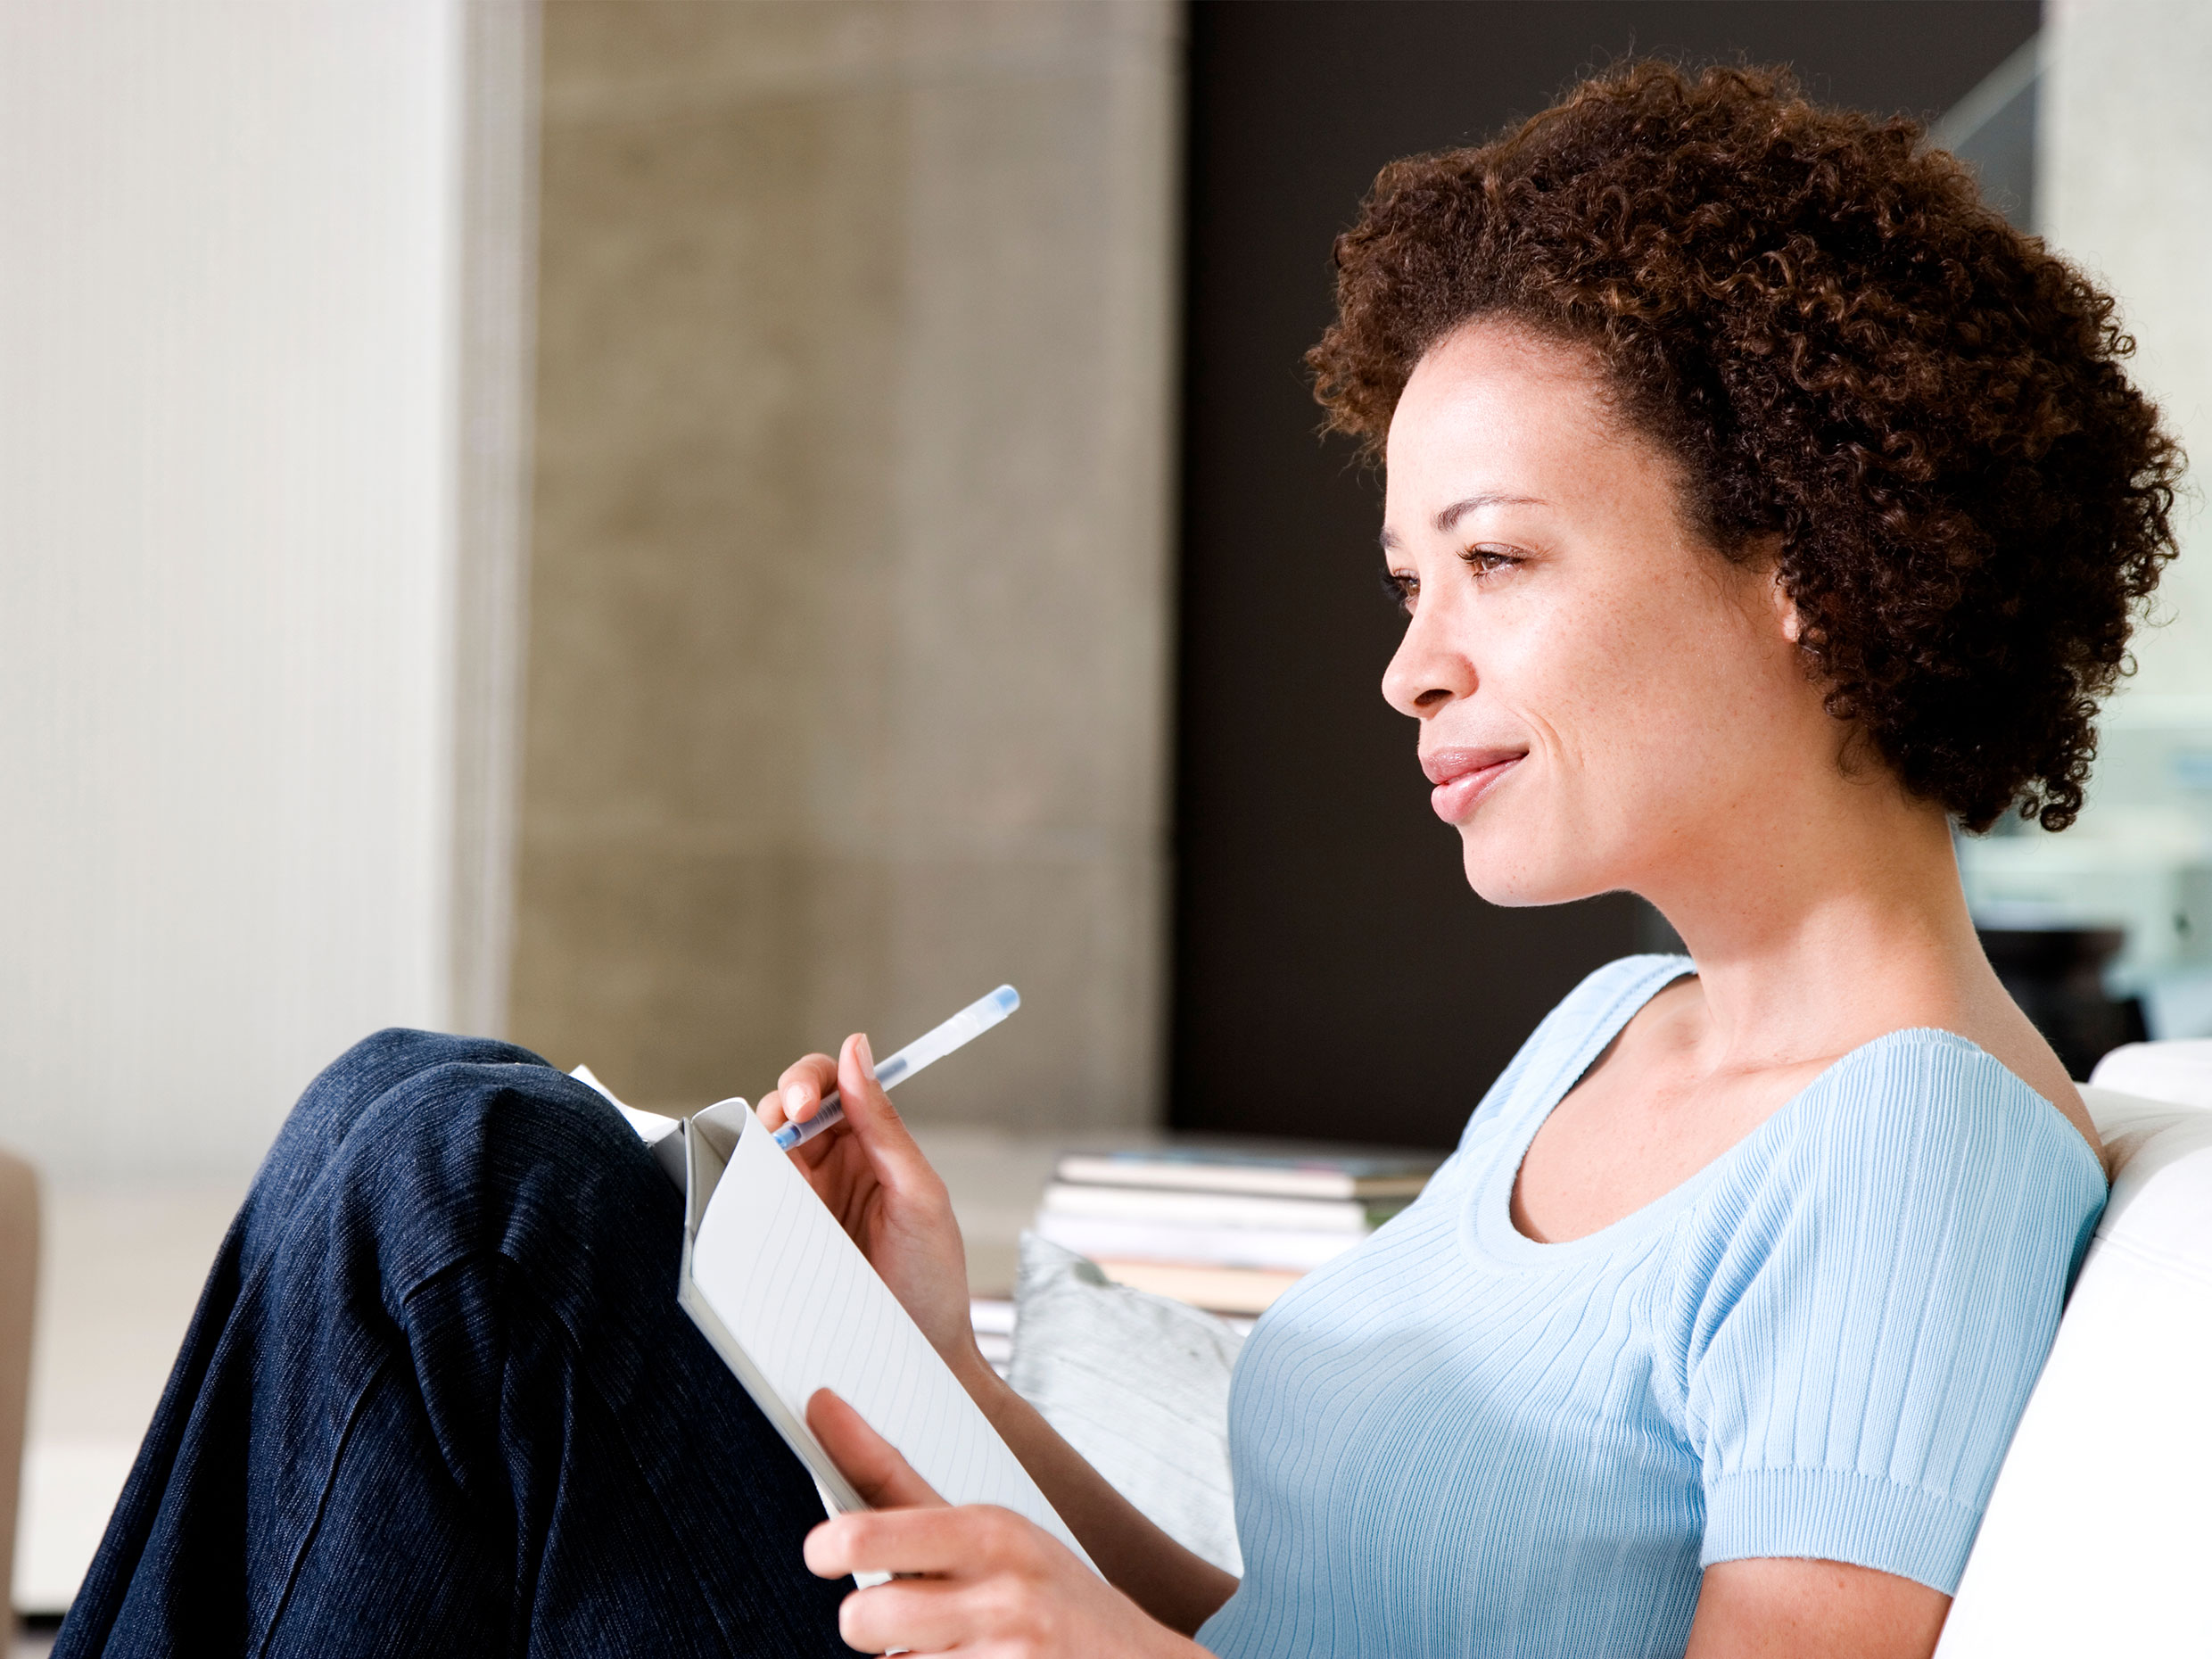 middle aged woman looking reflecting confidently on career options before her with notepad in hand